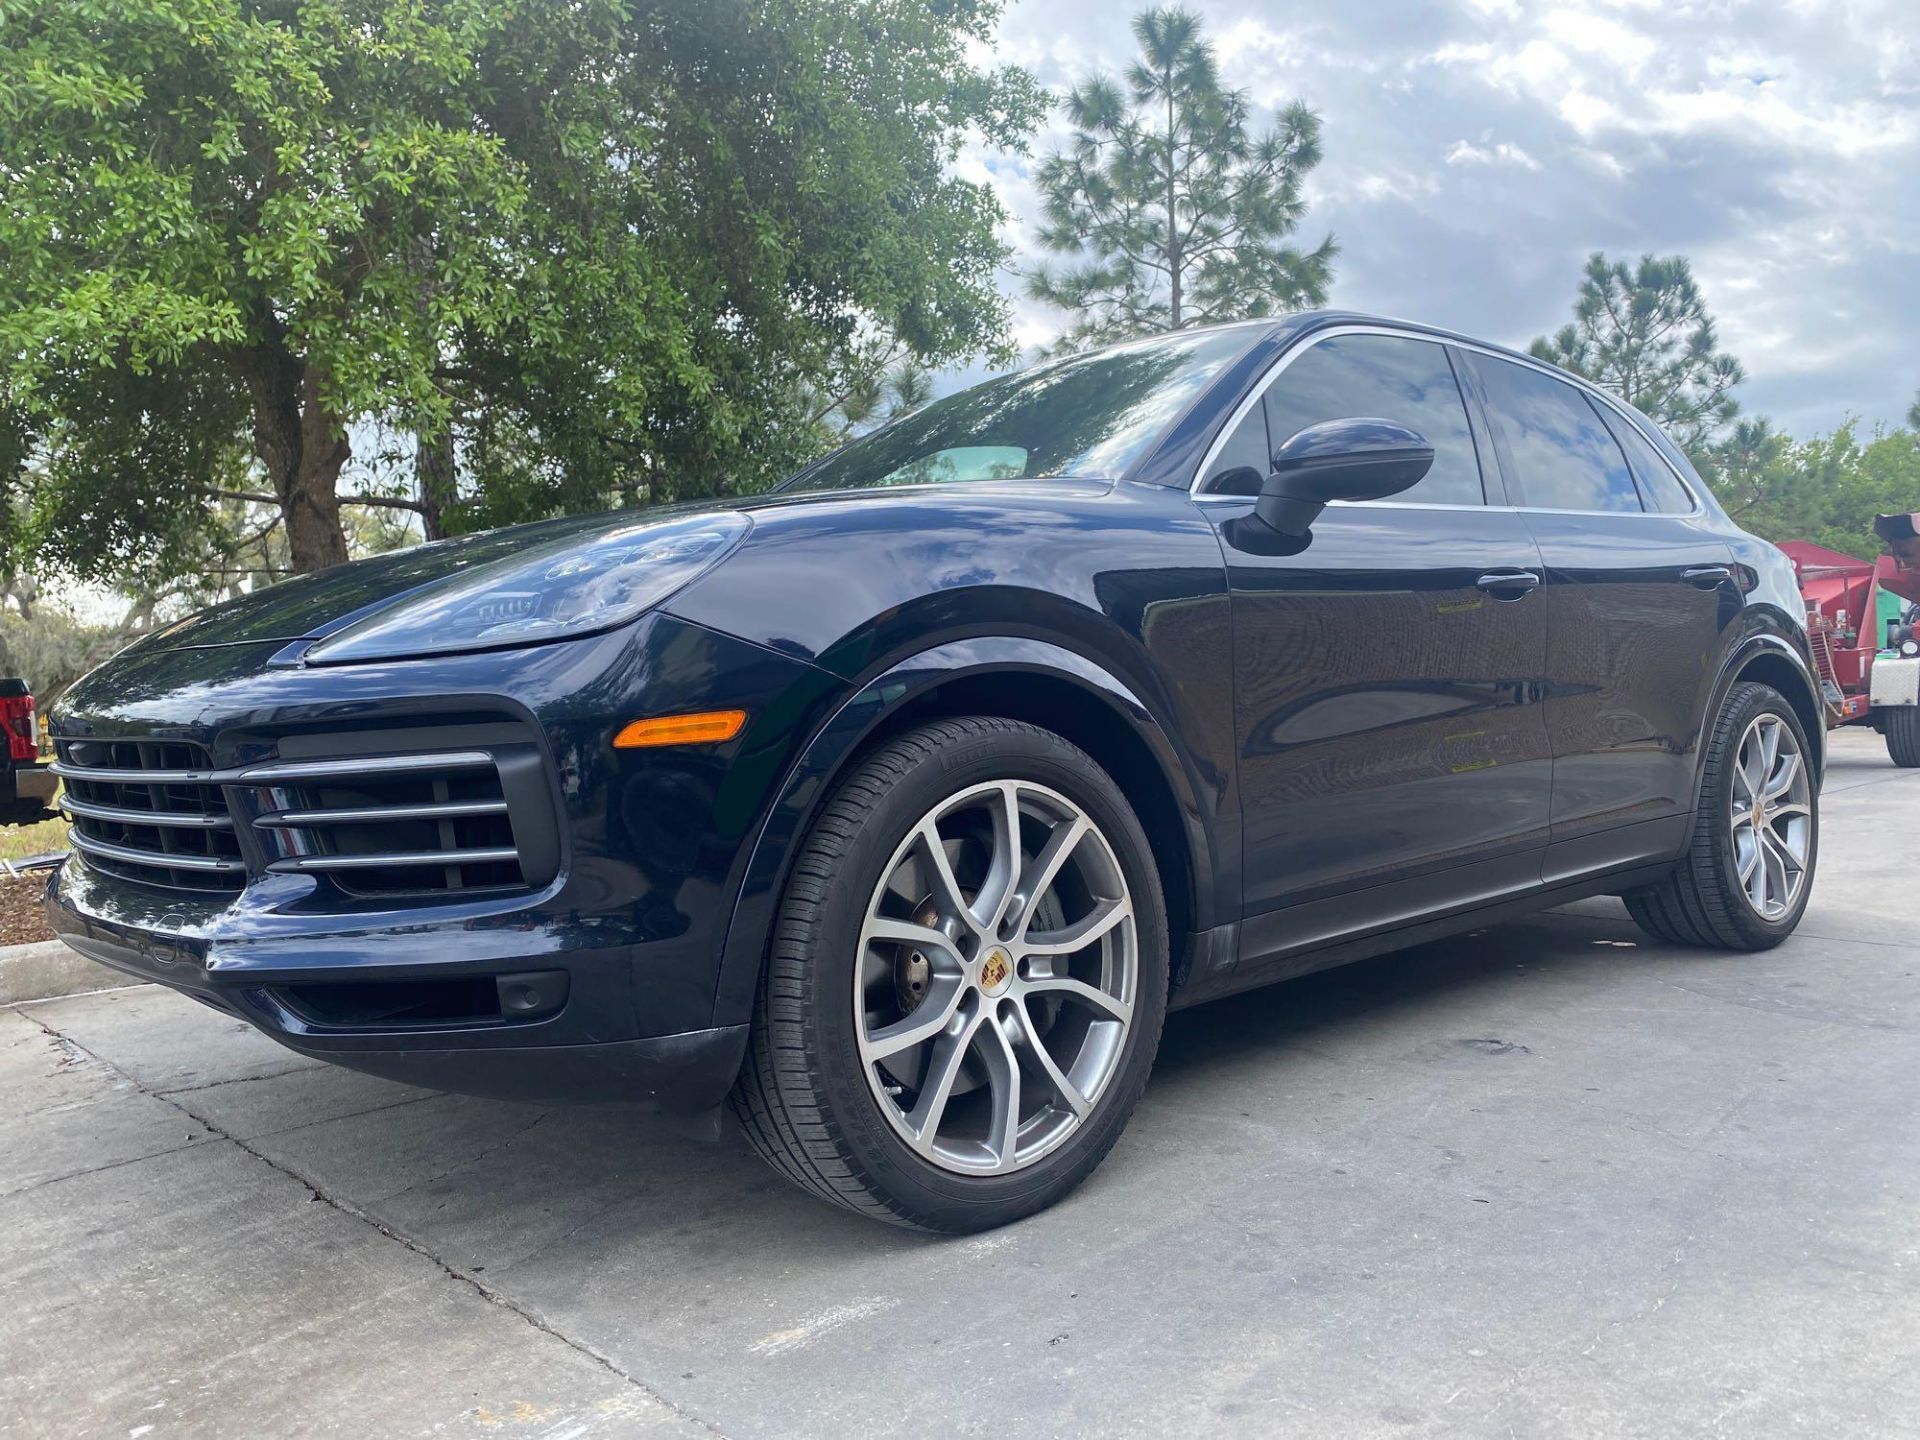 ***2019 PORSCHE CAYENNE S AWD SUV, LEATHER SEATS, MOON ROOF, A/C & HEATED SEATS, 2 KEYS INCLUDED - Image 3 of 47